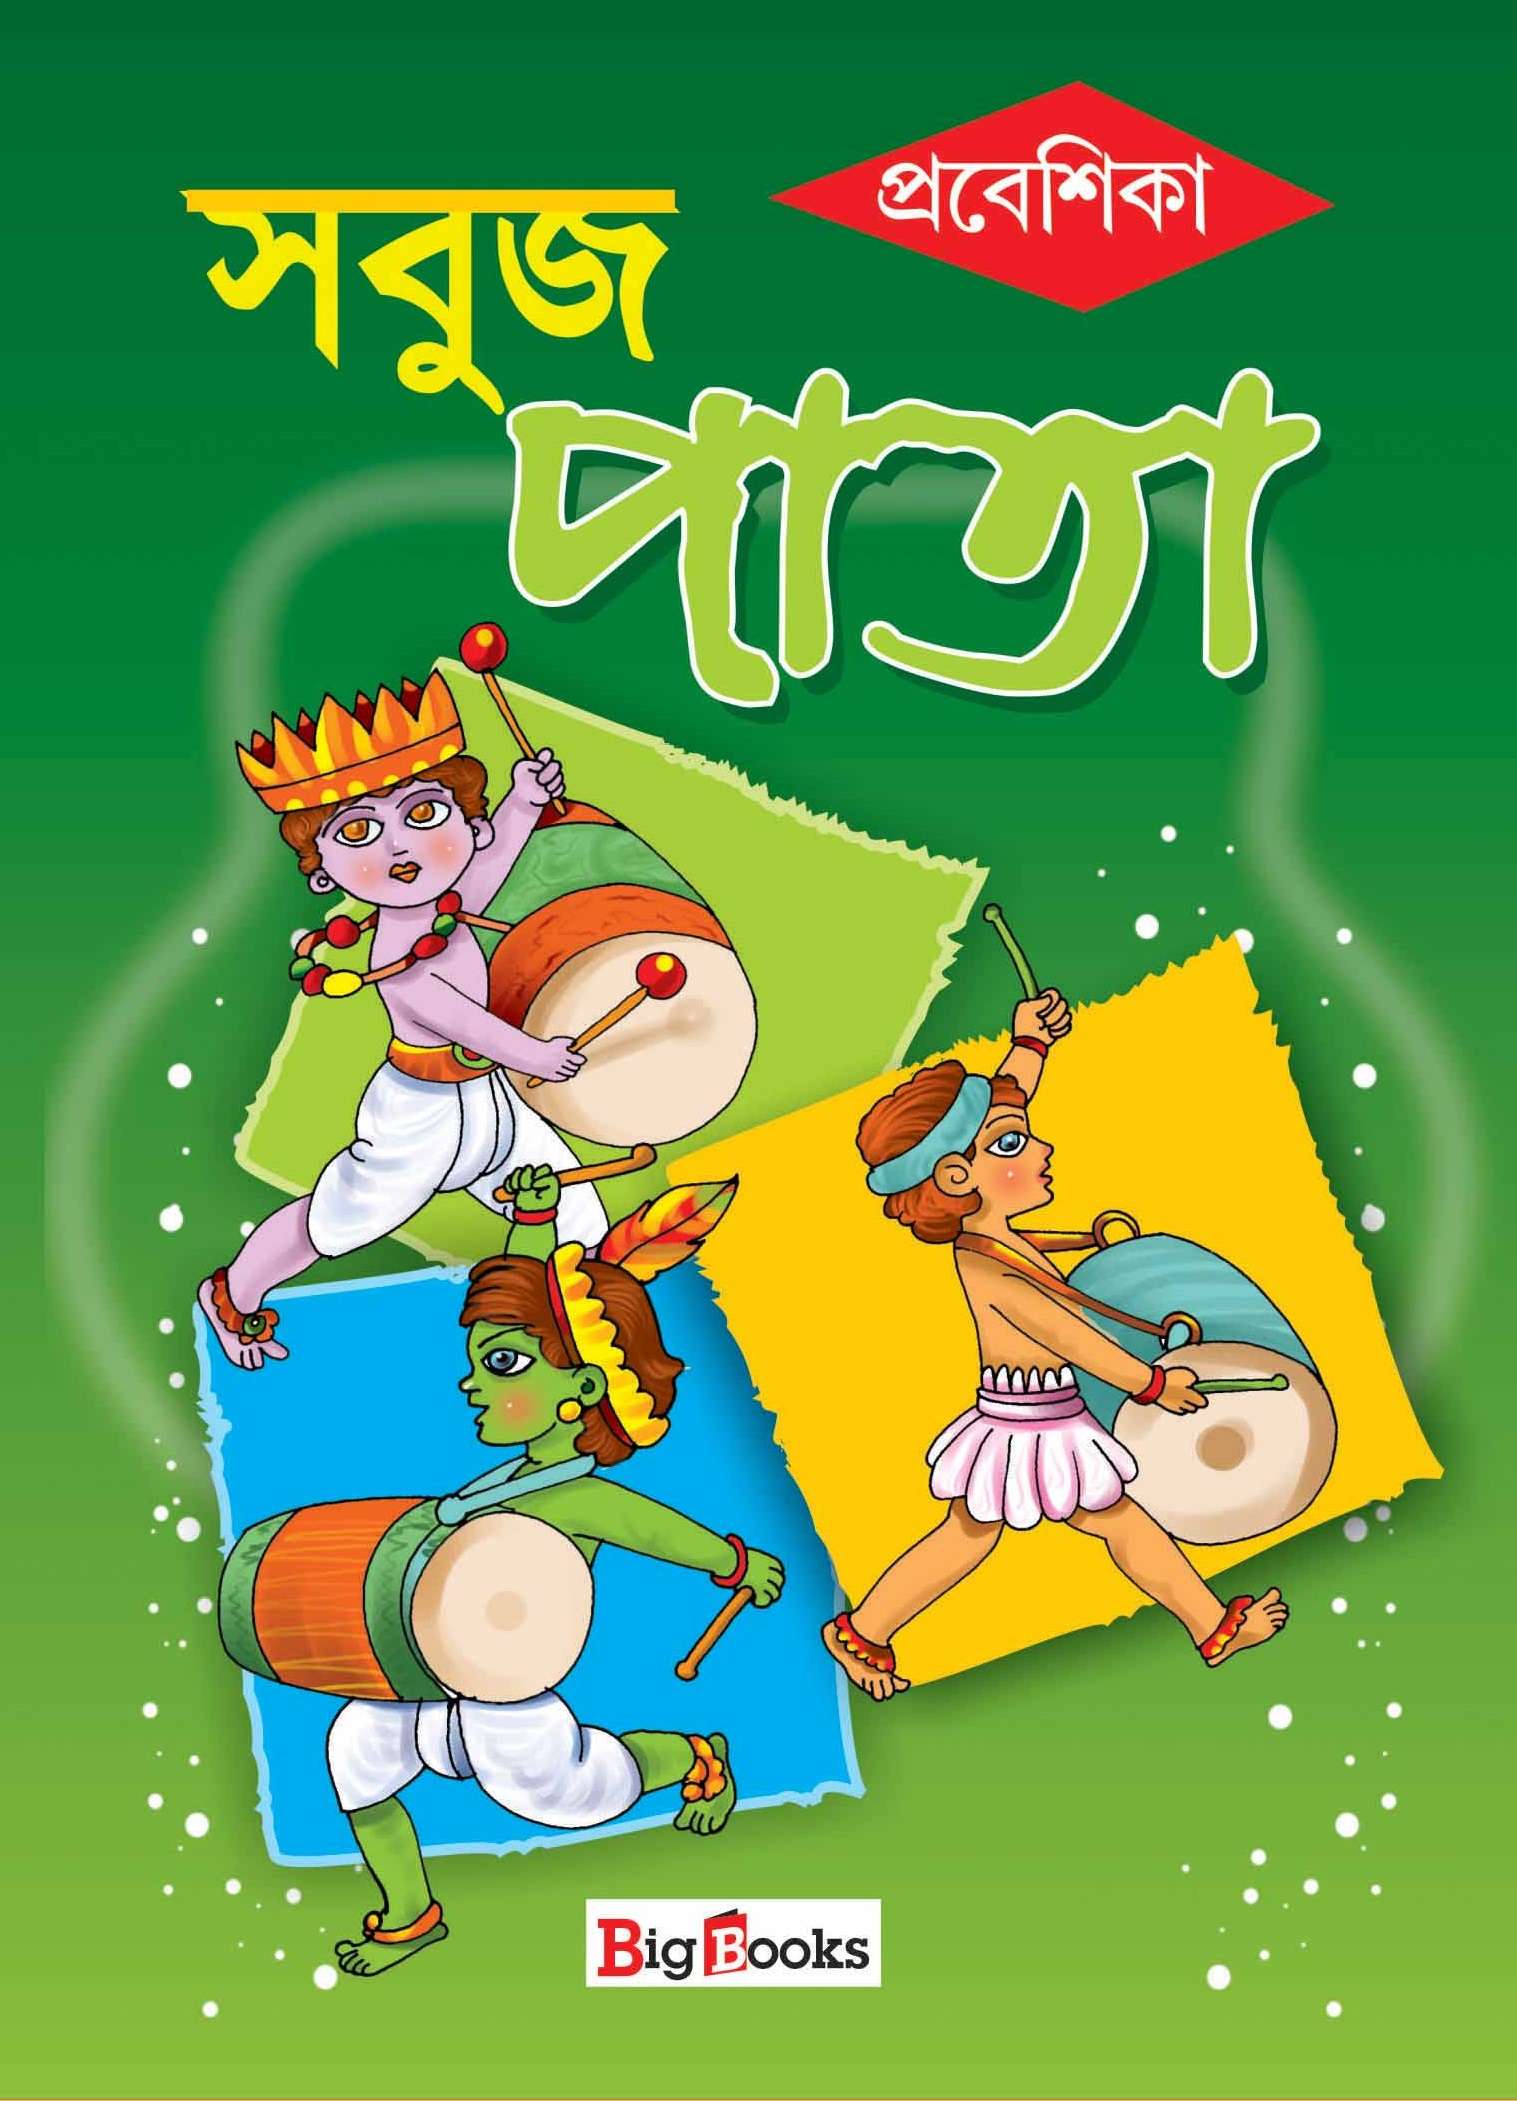 Buy Bengali text books Online for kids